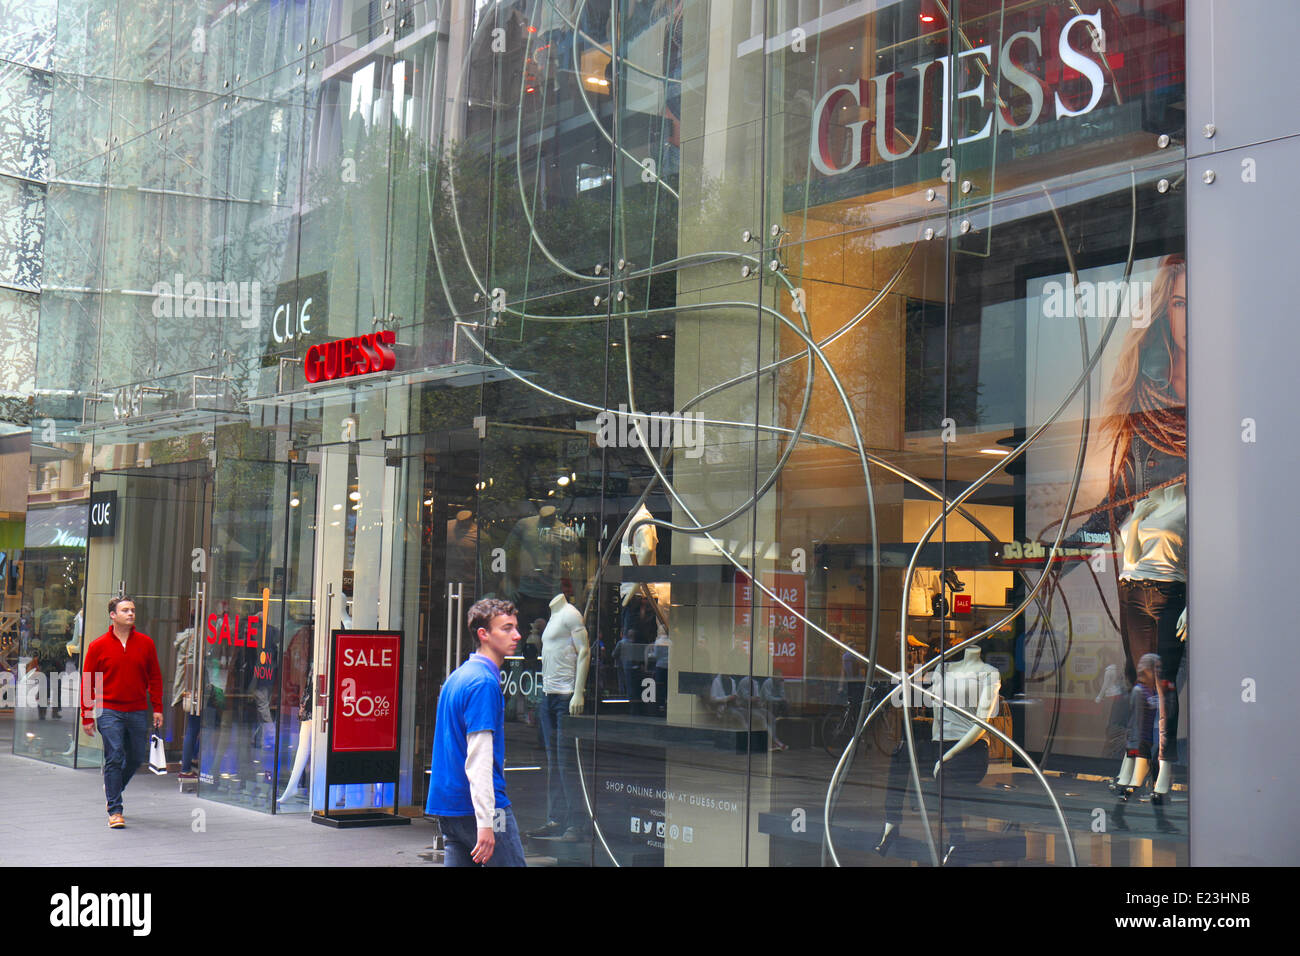 Guess Shop High Resolution Stock and - Alamy